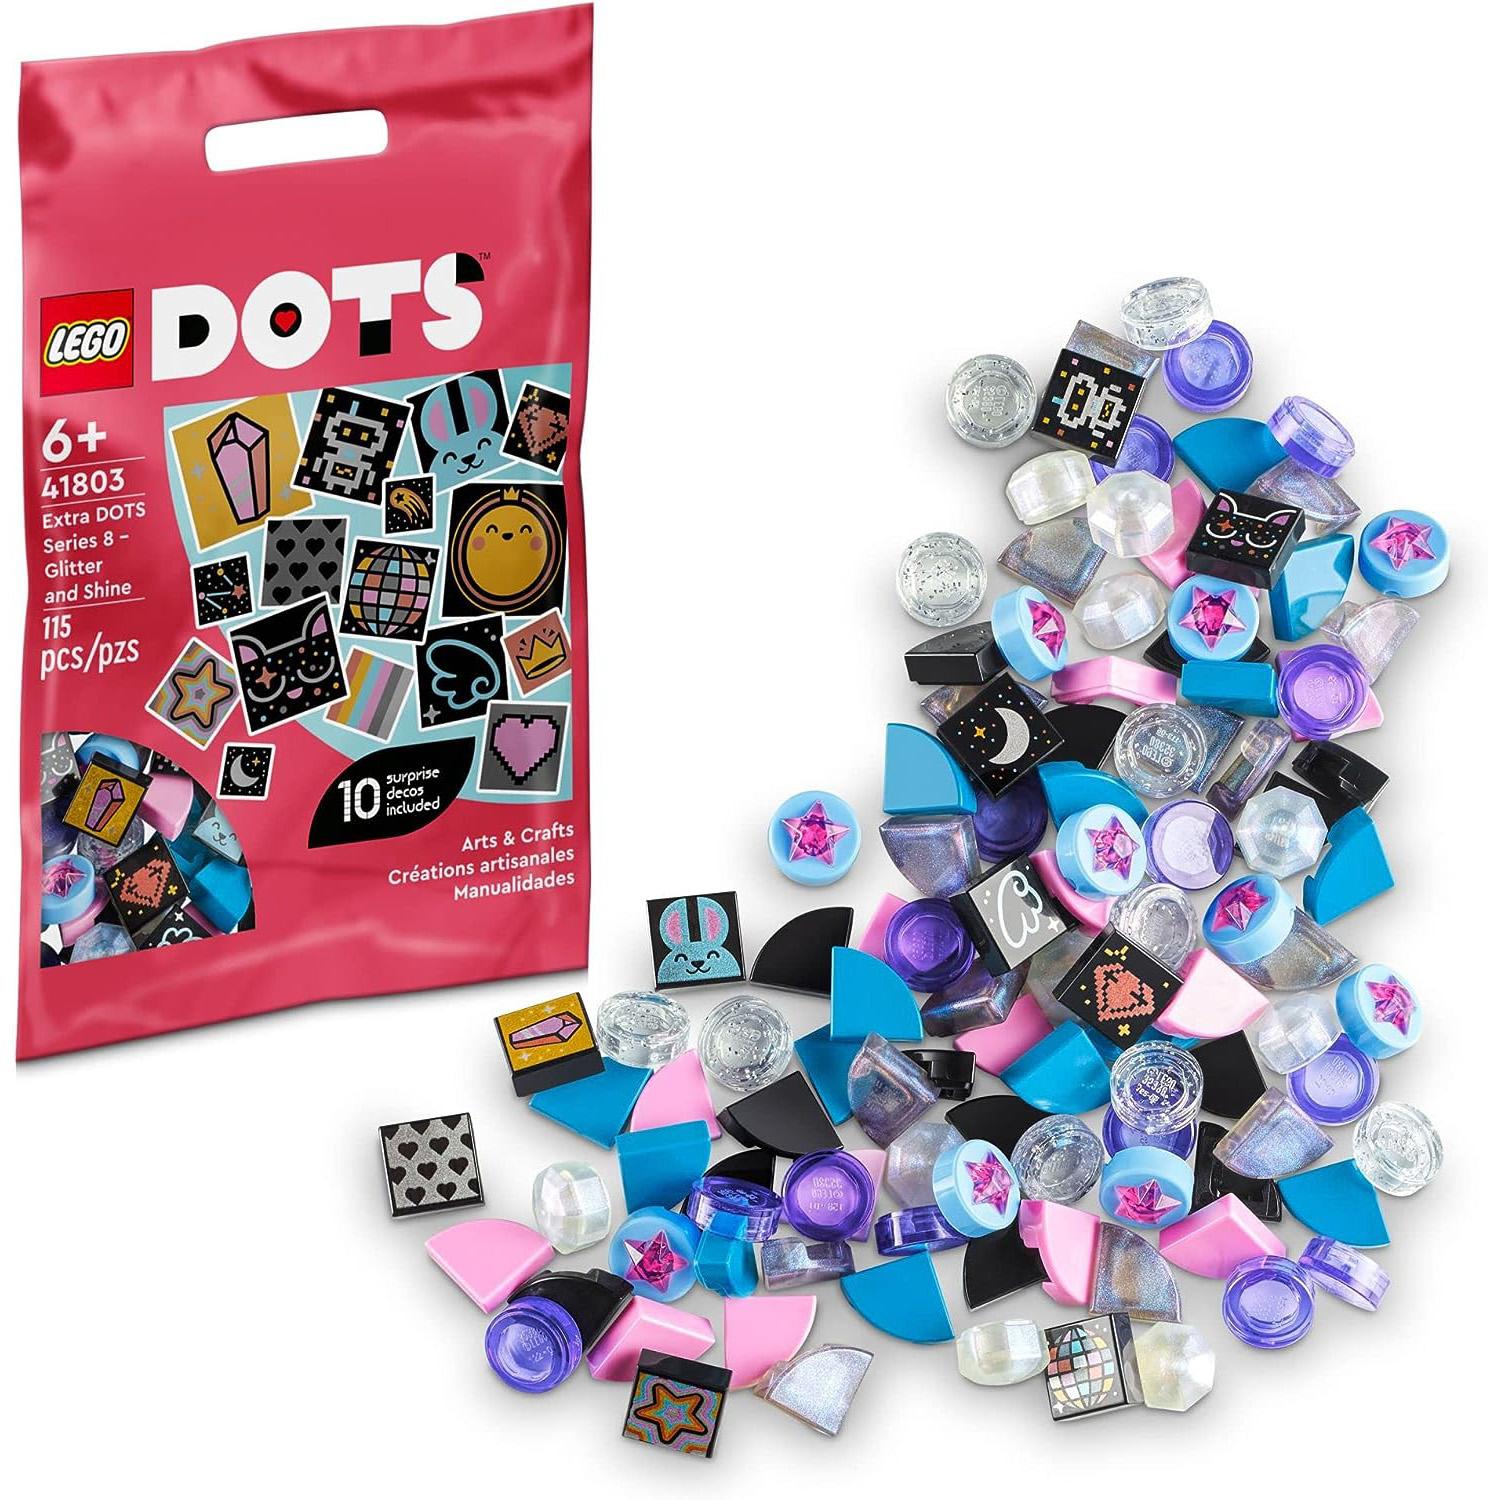 Lego Dots Extra DOTS Series 8 Glitter and Shine 41803 for $2